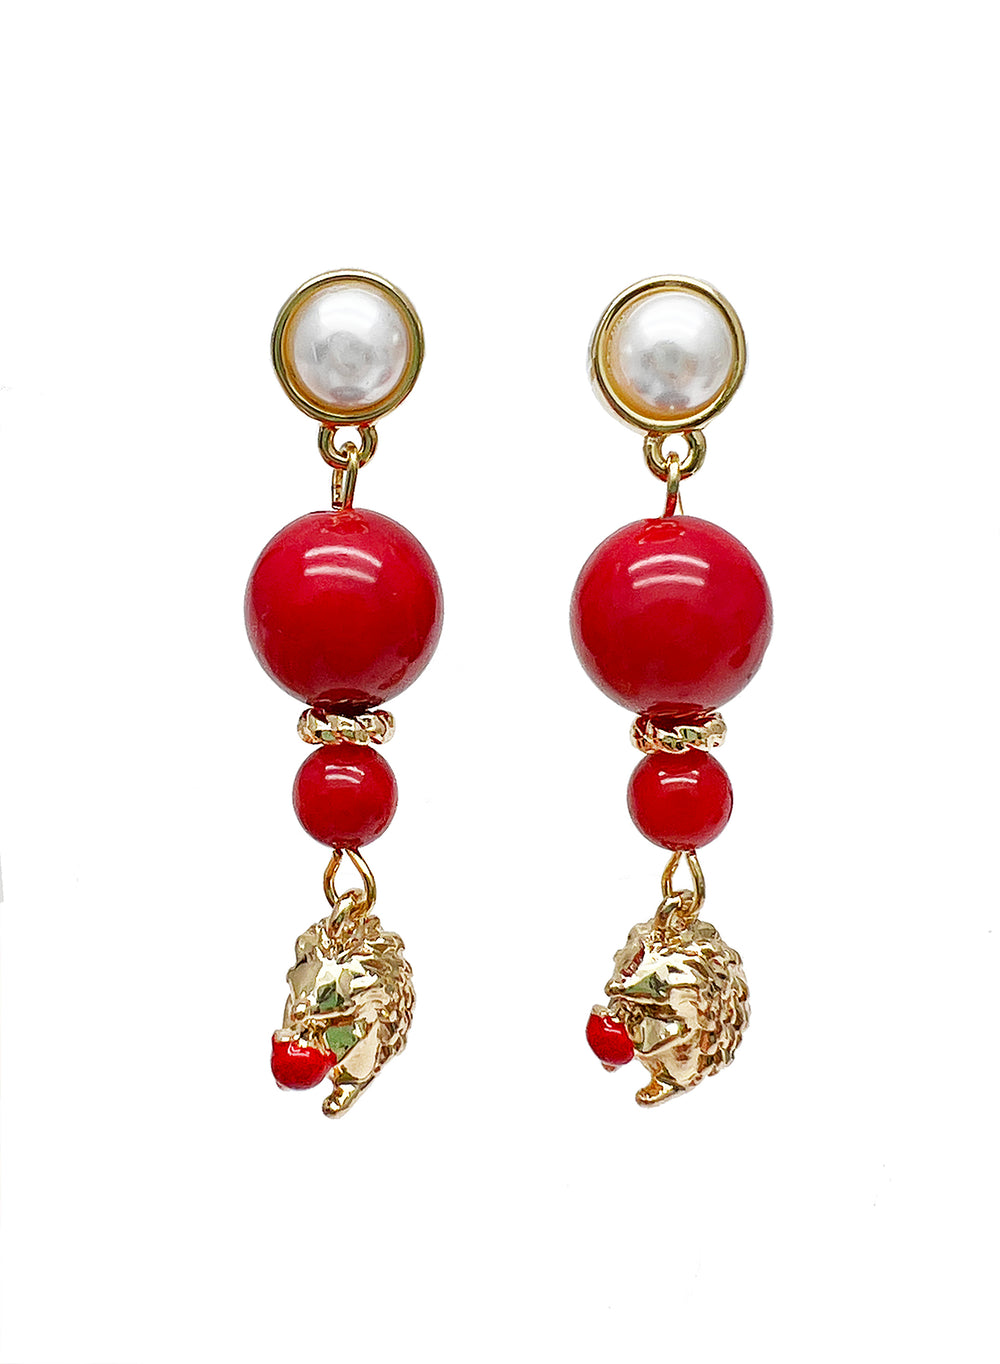 Red Coral With hedgehog Pendant Stud Earrings JE001 - FARRA